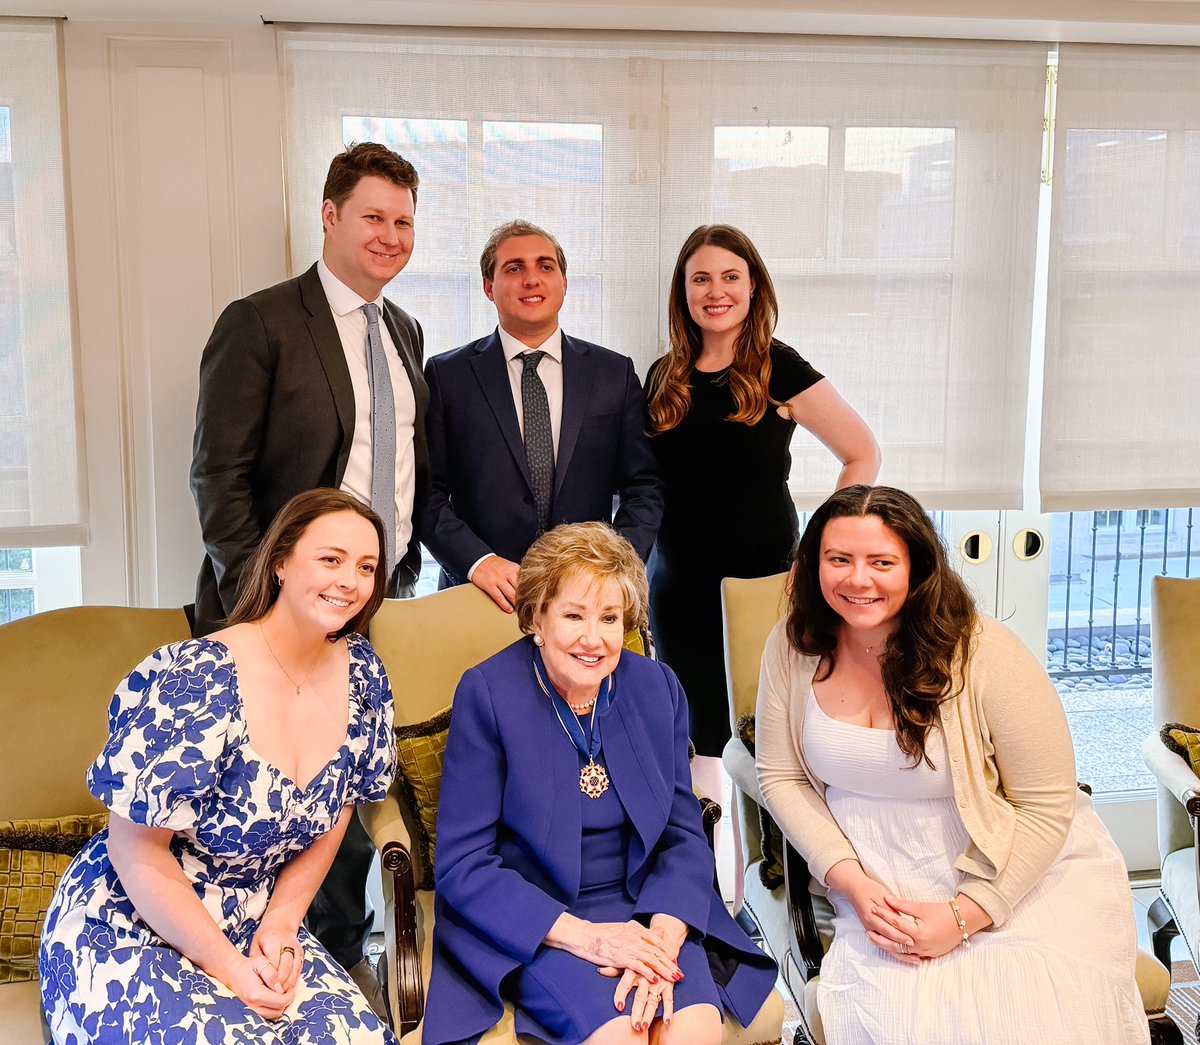 Attending yesterday evening's reception to celebrate Elizabeth Dole receiving the Presidential Medal of Freedom was a truly special experience. Elizabeth has consistently been a trailblazer in public service, dedicating her life to supporting #military families and spearheading…